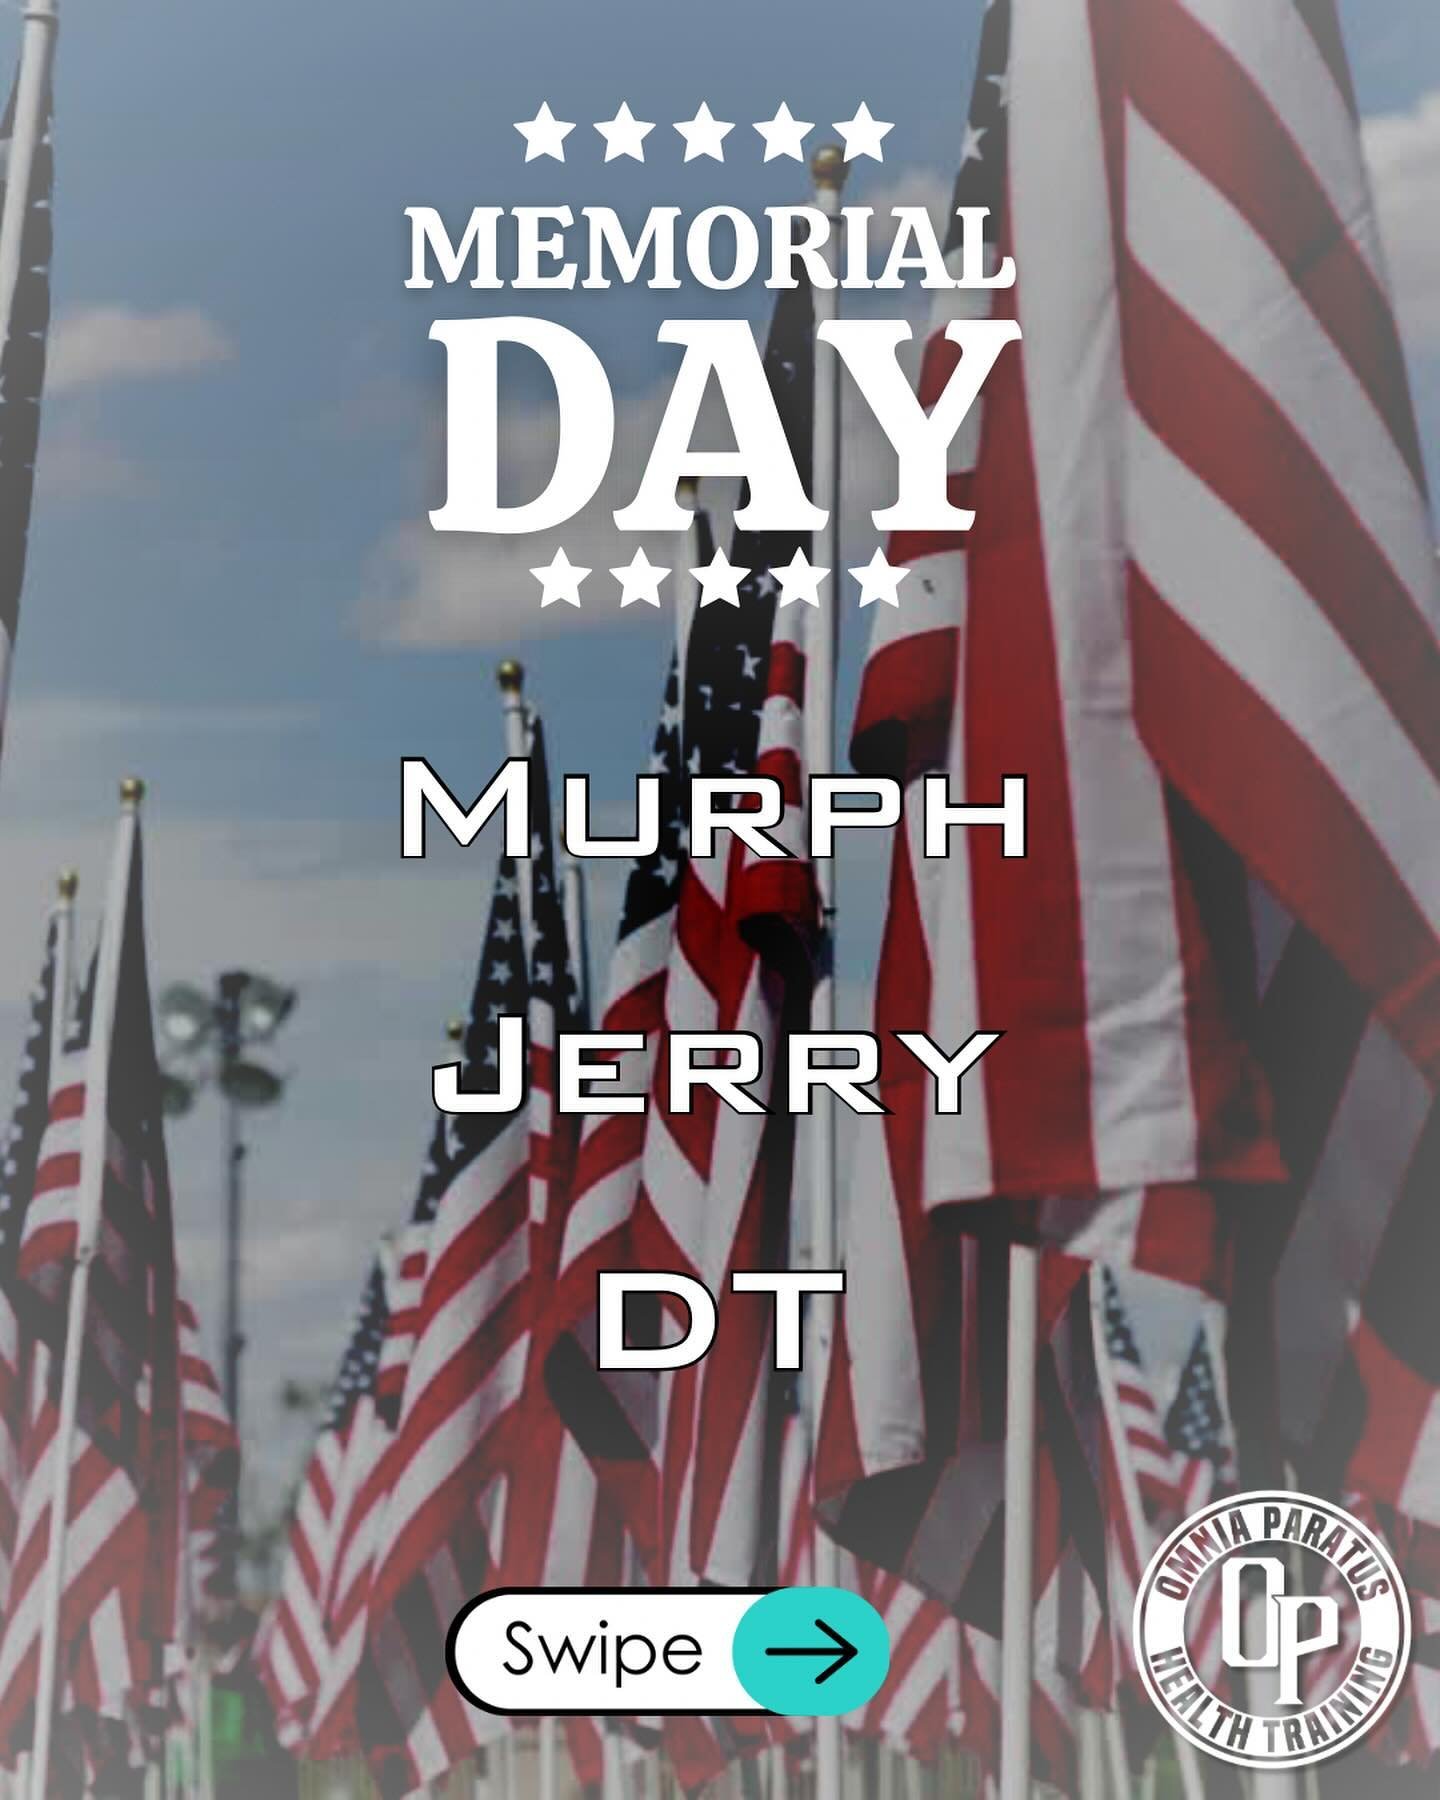 Join us for another great Memorial Day celebration on 5/25 as we host some Hero challenges.

🔹You can find sign ups on the Zen planner app (current members)

🔹Visit our website under the &ldquo;membership&rdquo; tab scroll down to EVENTS and sign u